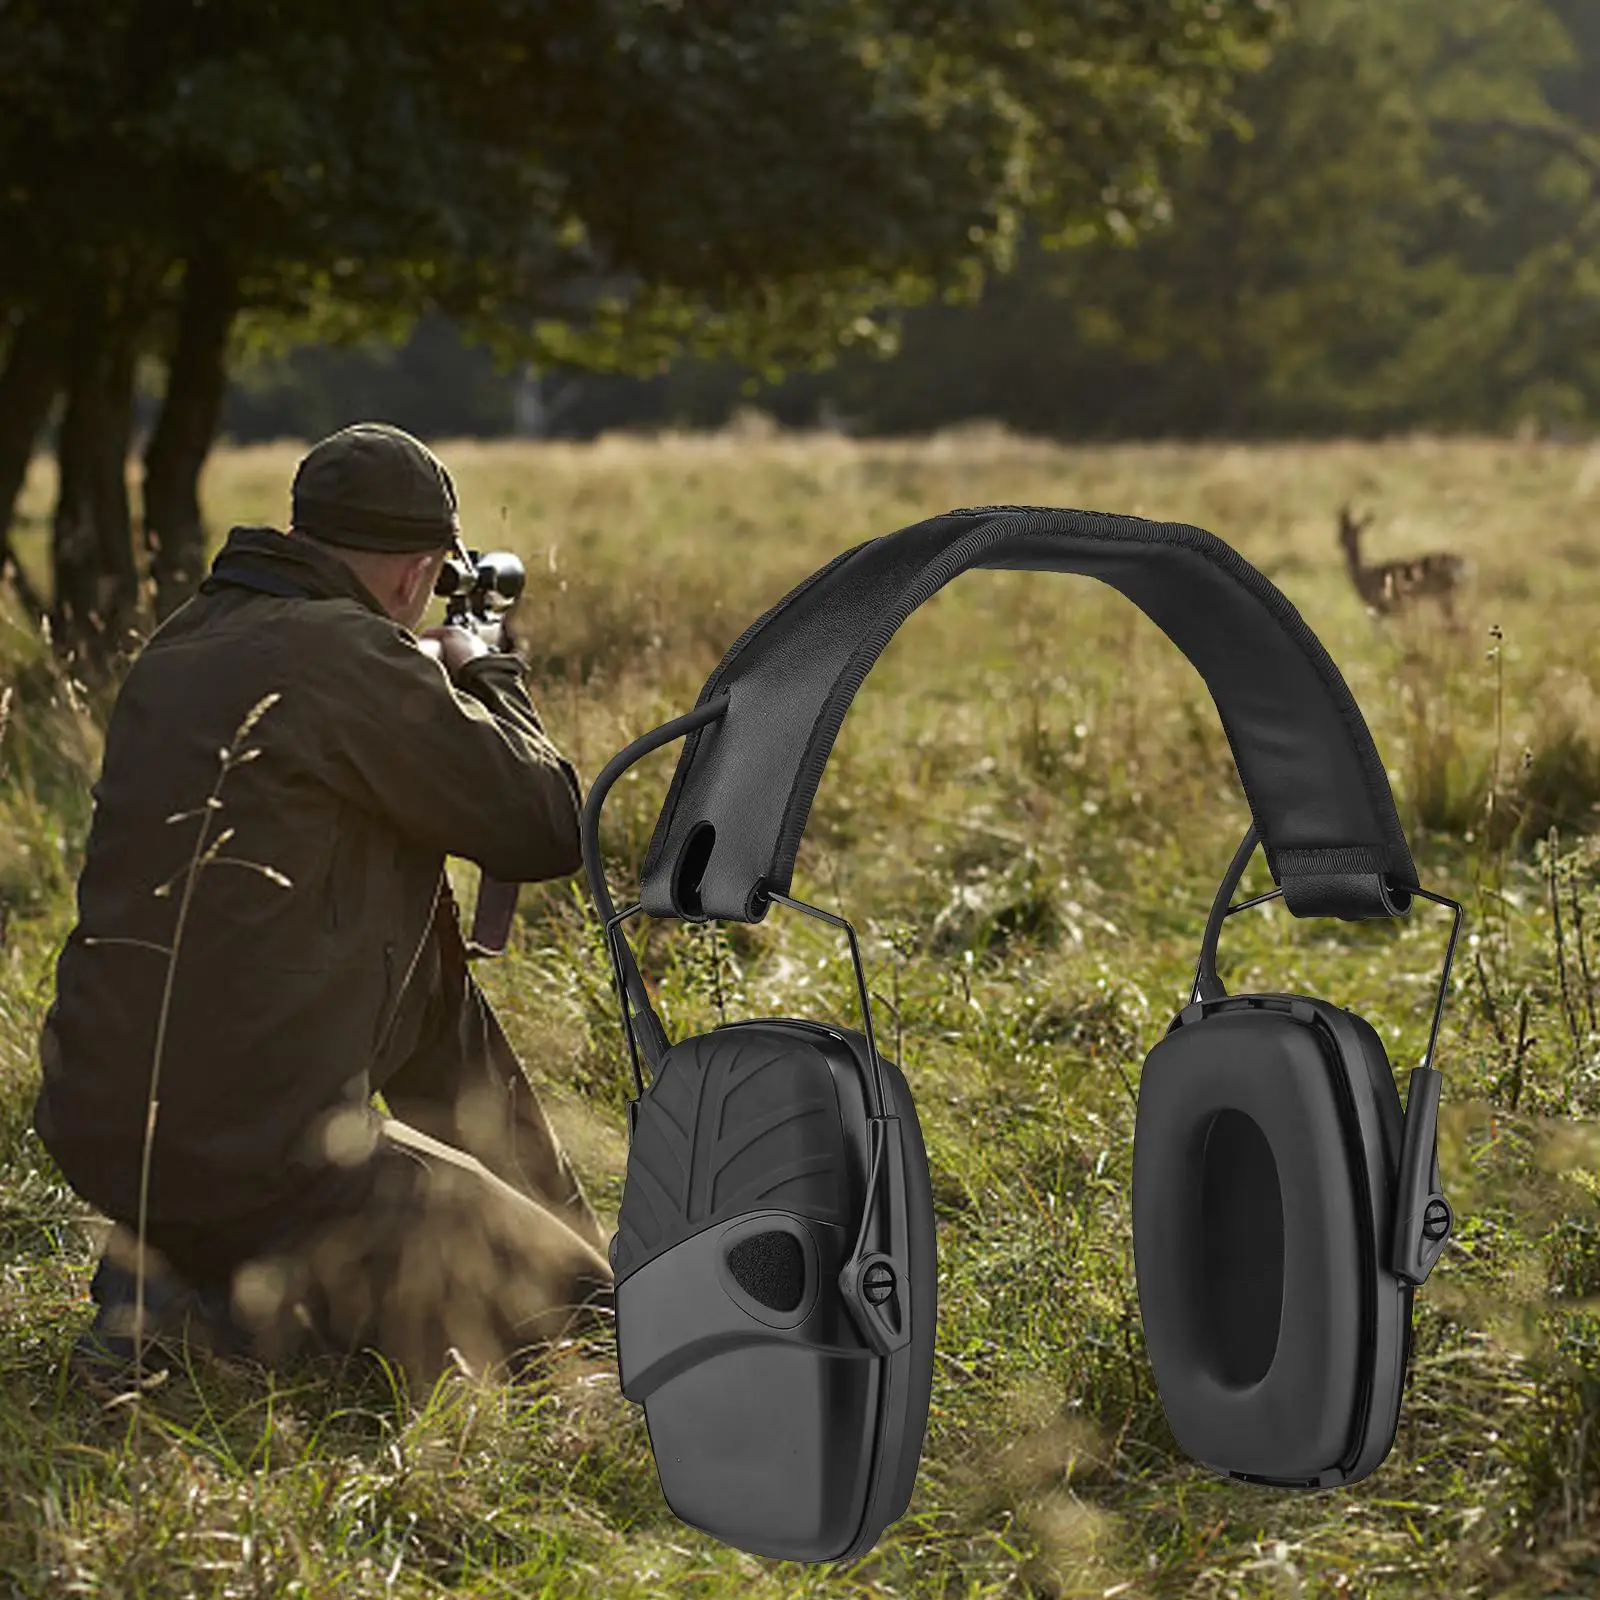 Ear Muffs Folding Noise Cancelling Hearing Protection Adjustable for Shooting Team Activities Manufacturing Woodwork Mowing